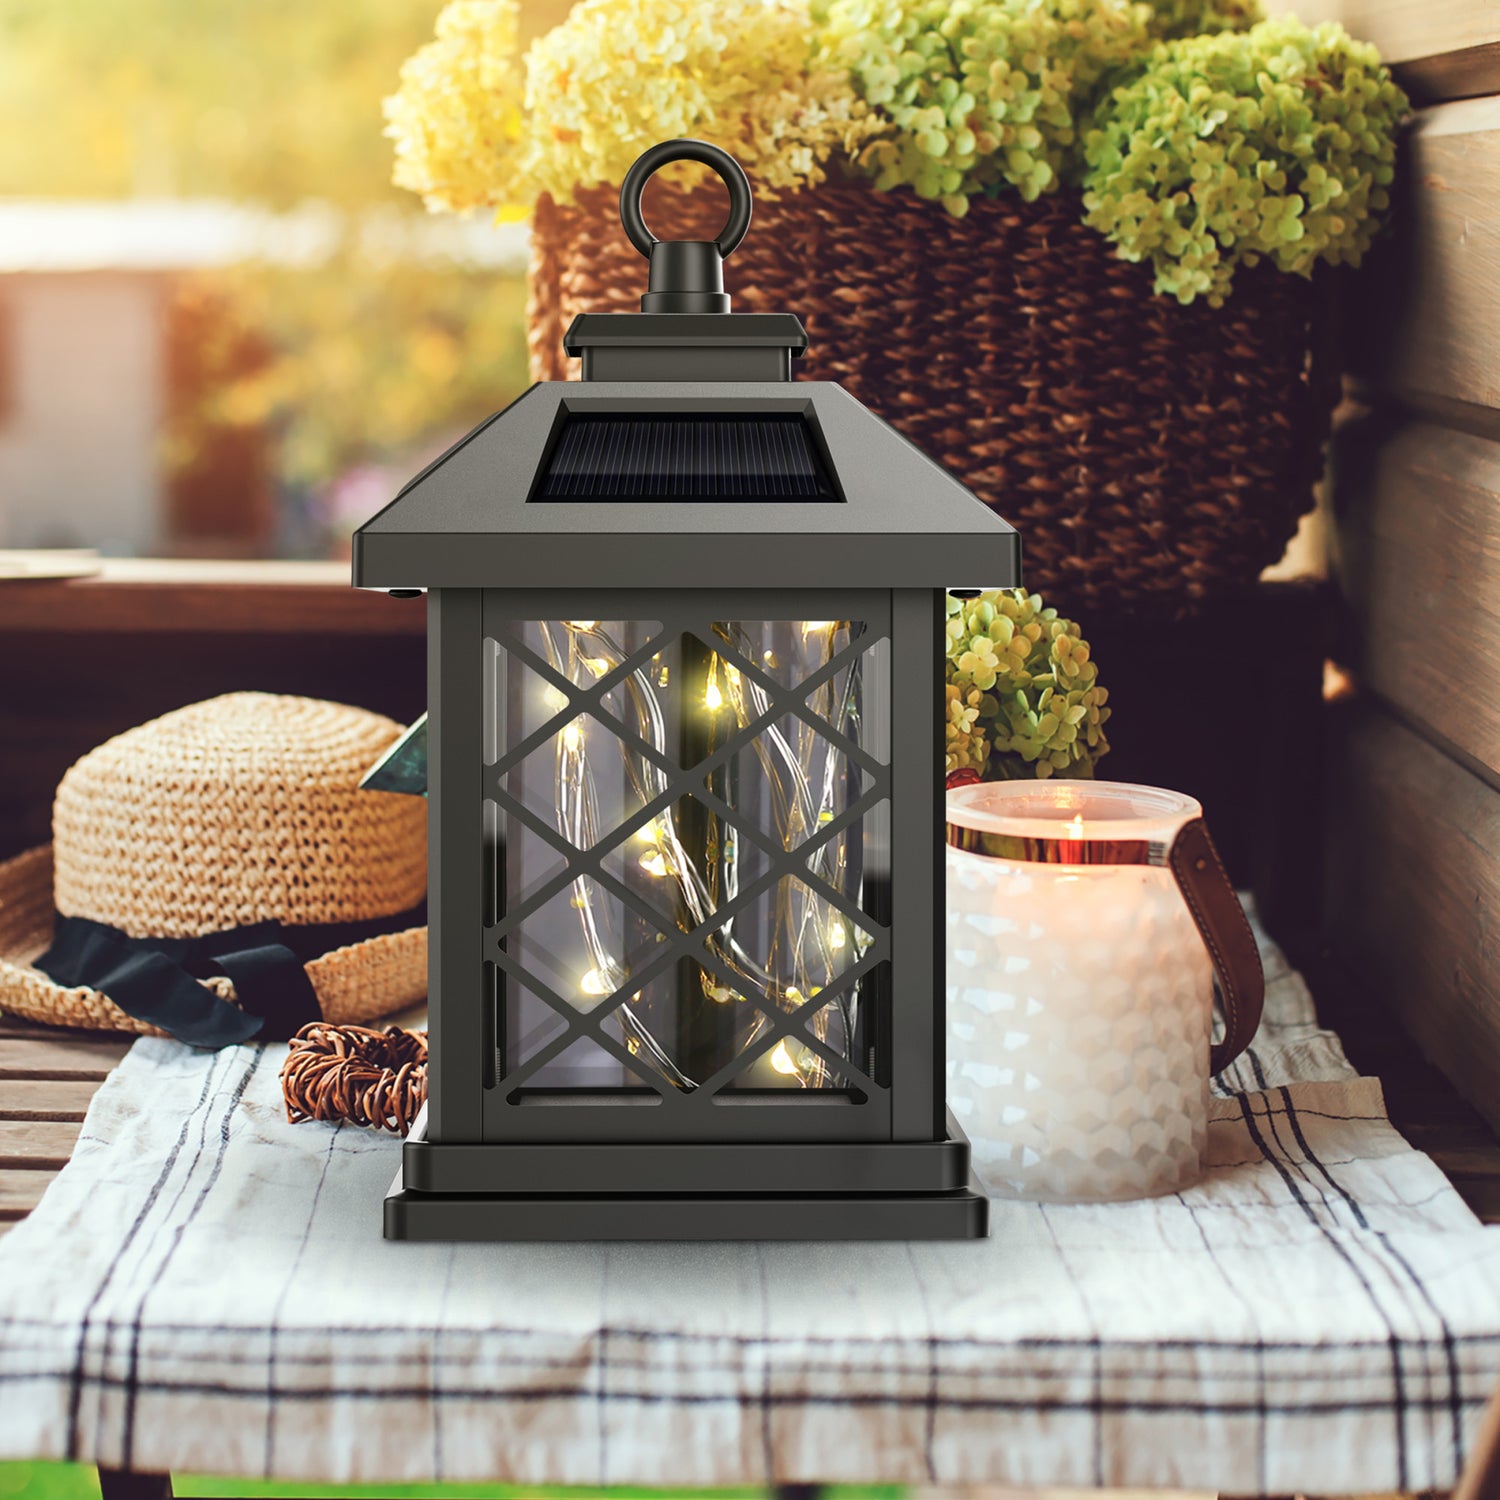 4 in. Square Solar Powered Outdoor Fairy Lantern